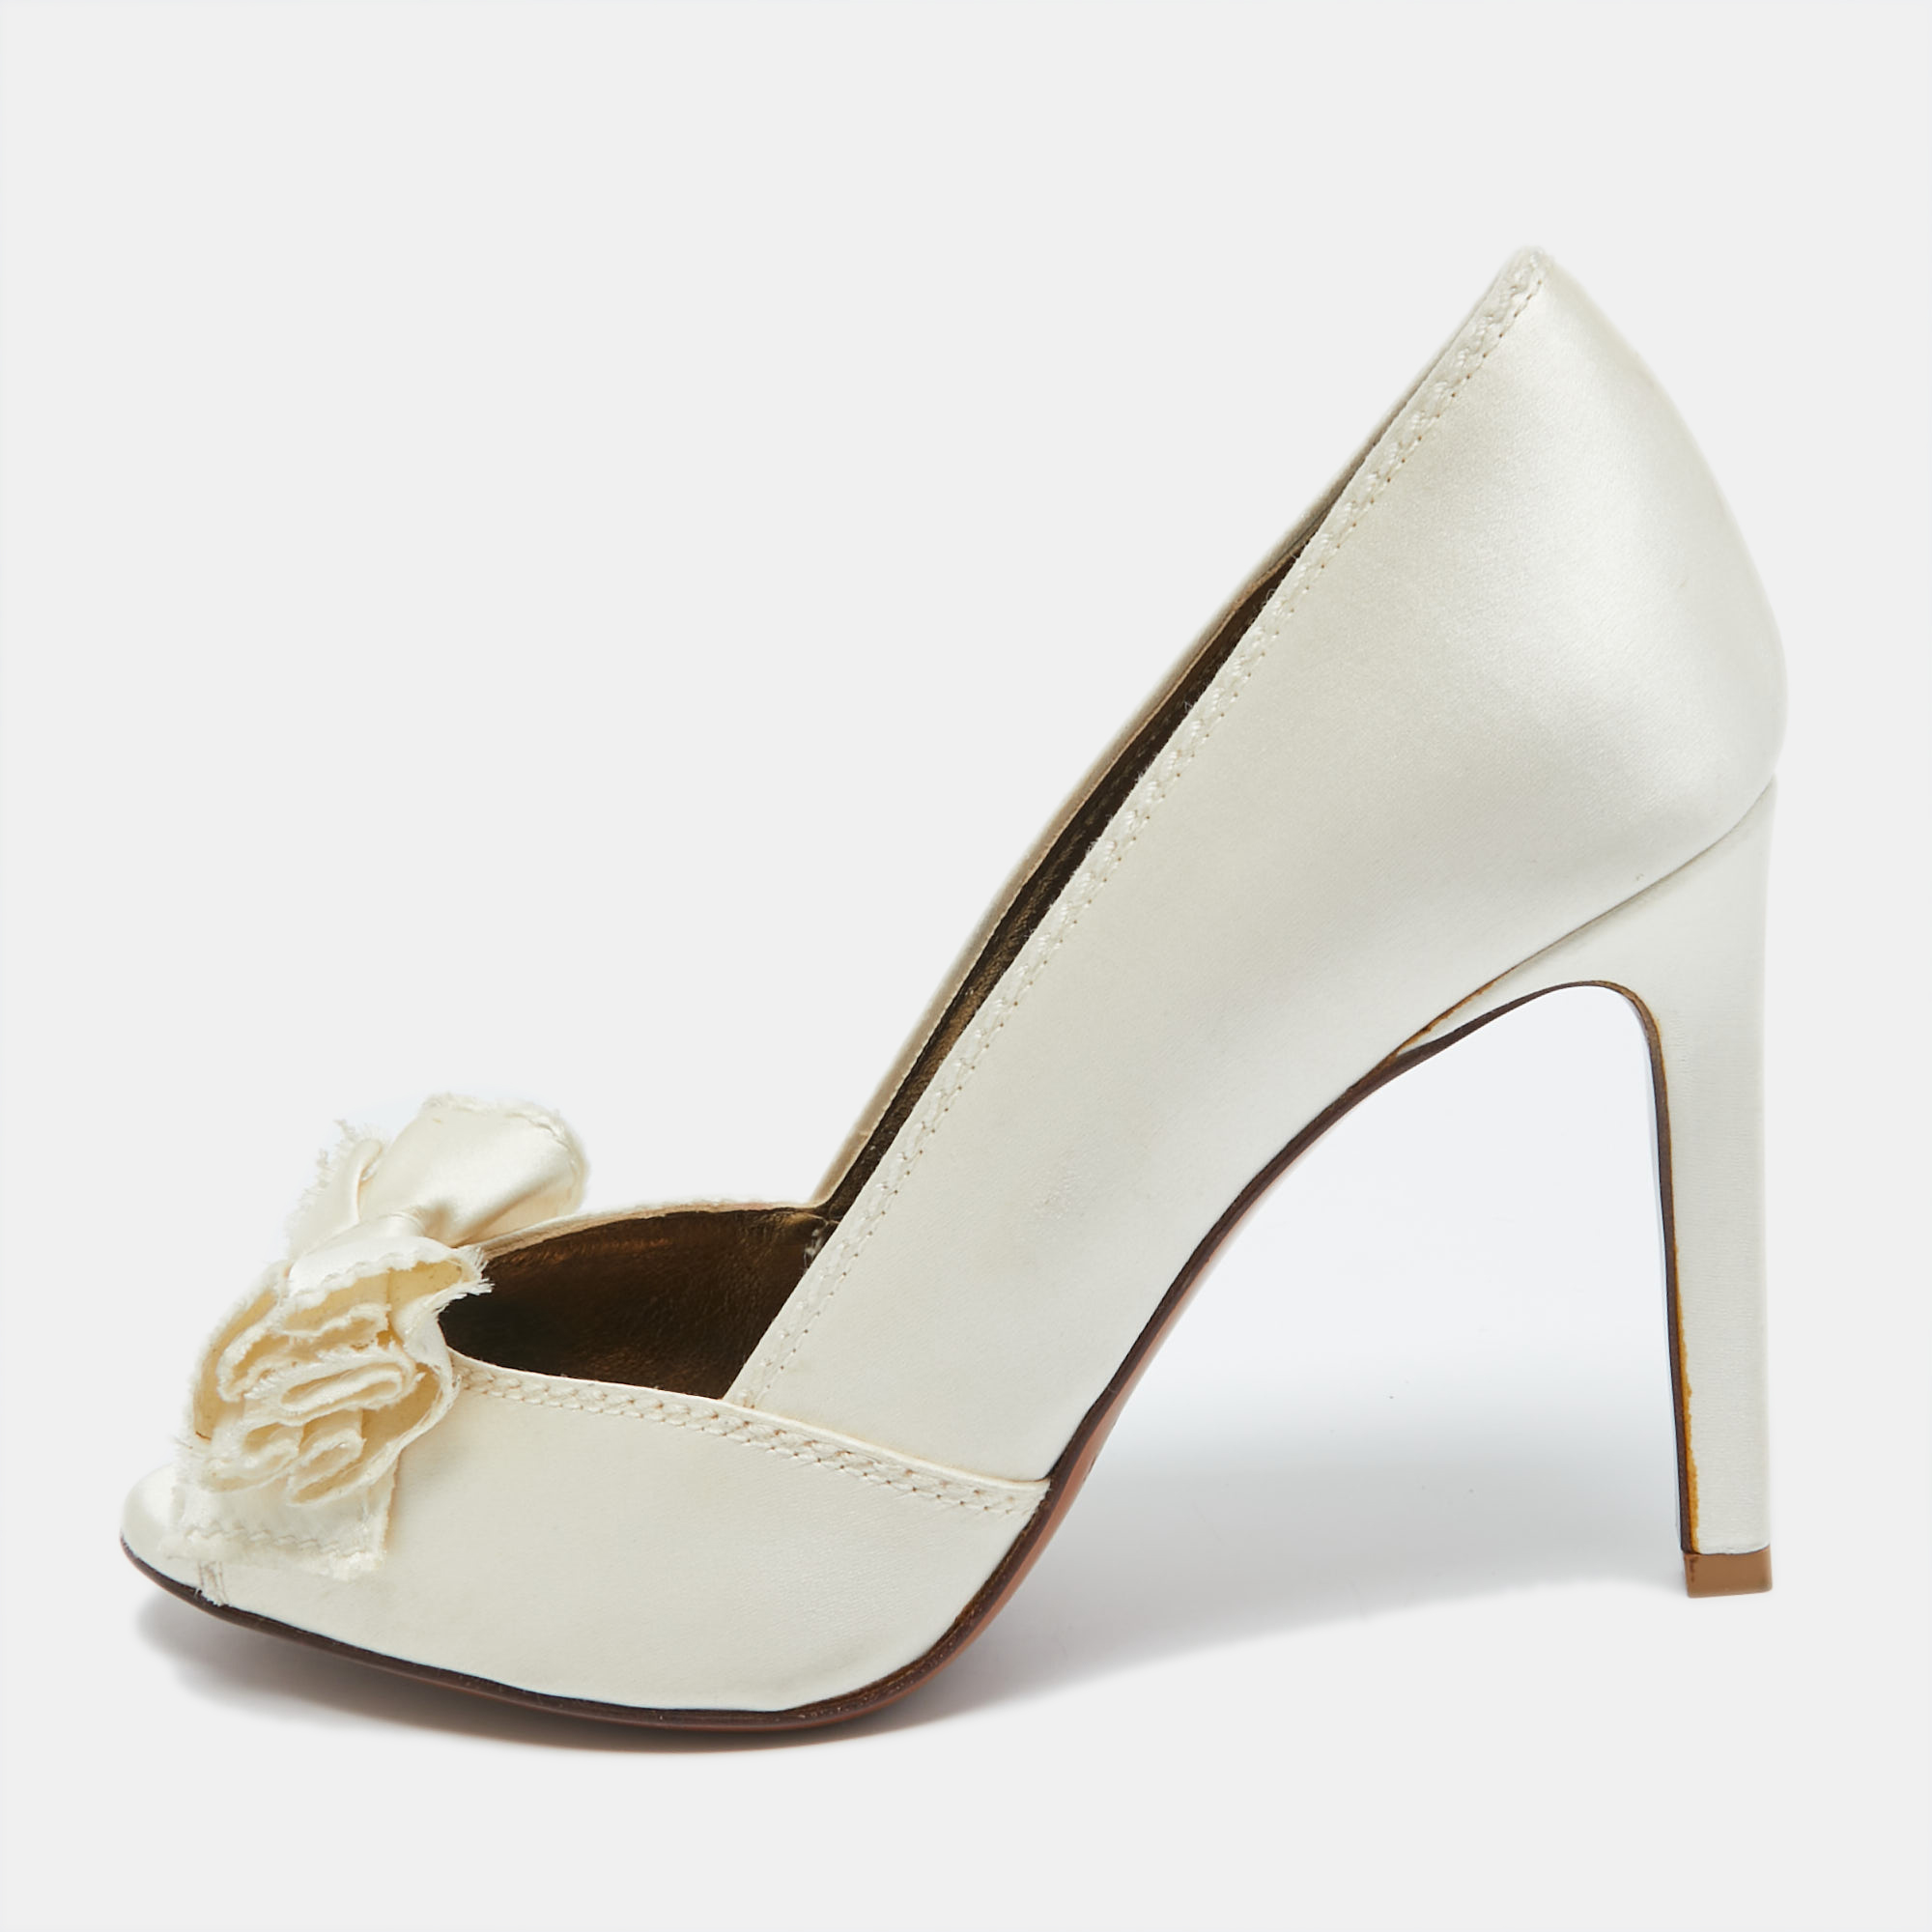 Pre-owned Lanvin Off White Satin Bow Peep Toe Pumps Size 36.5